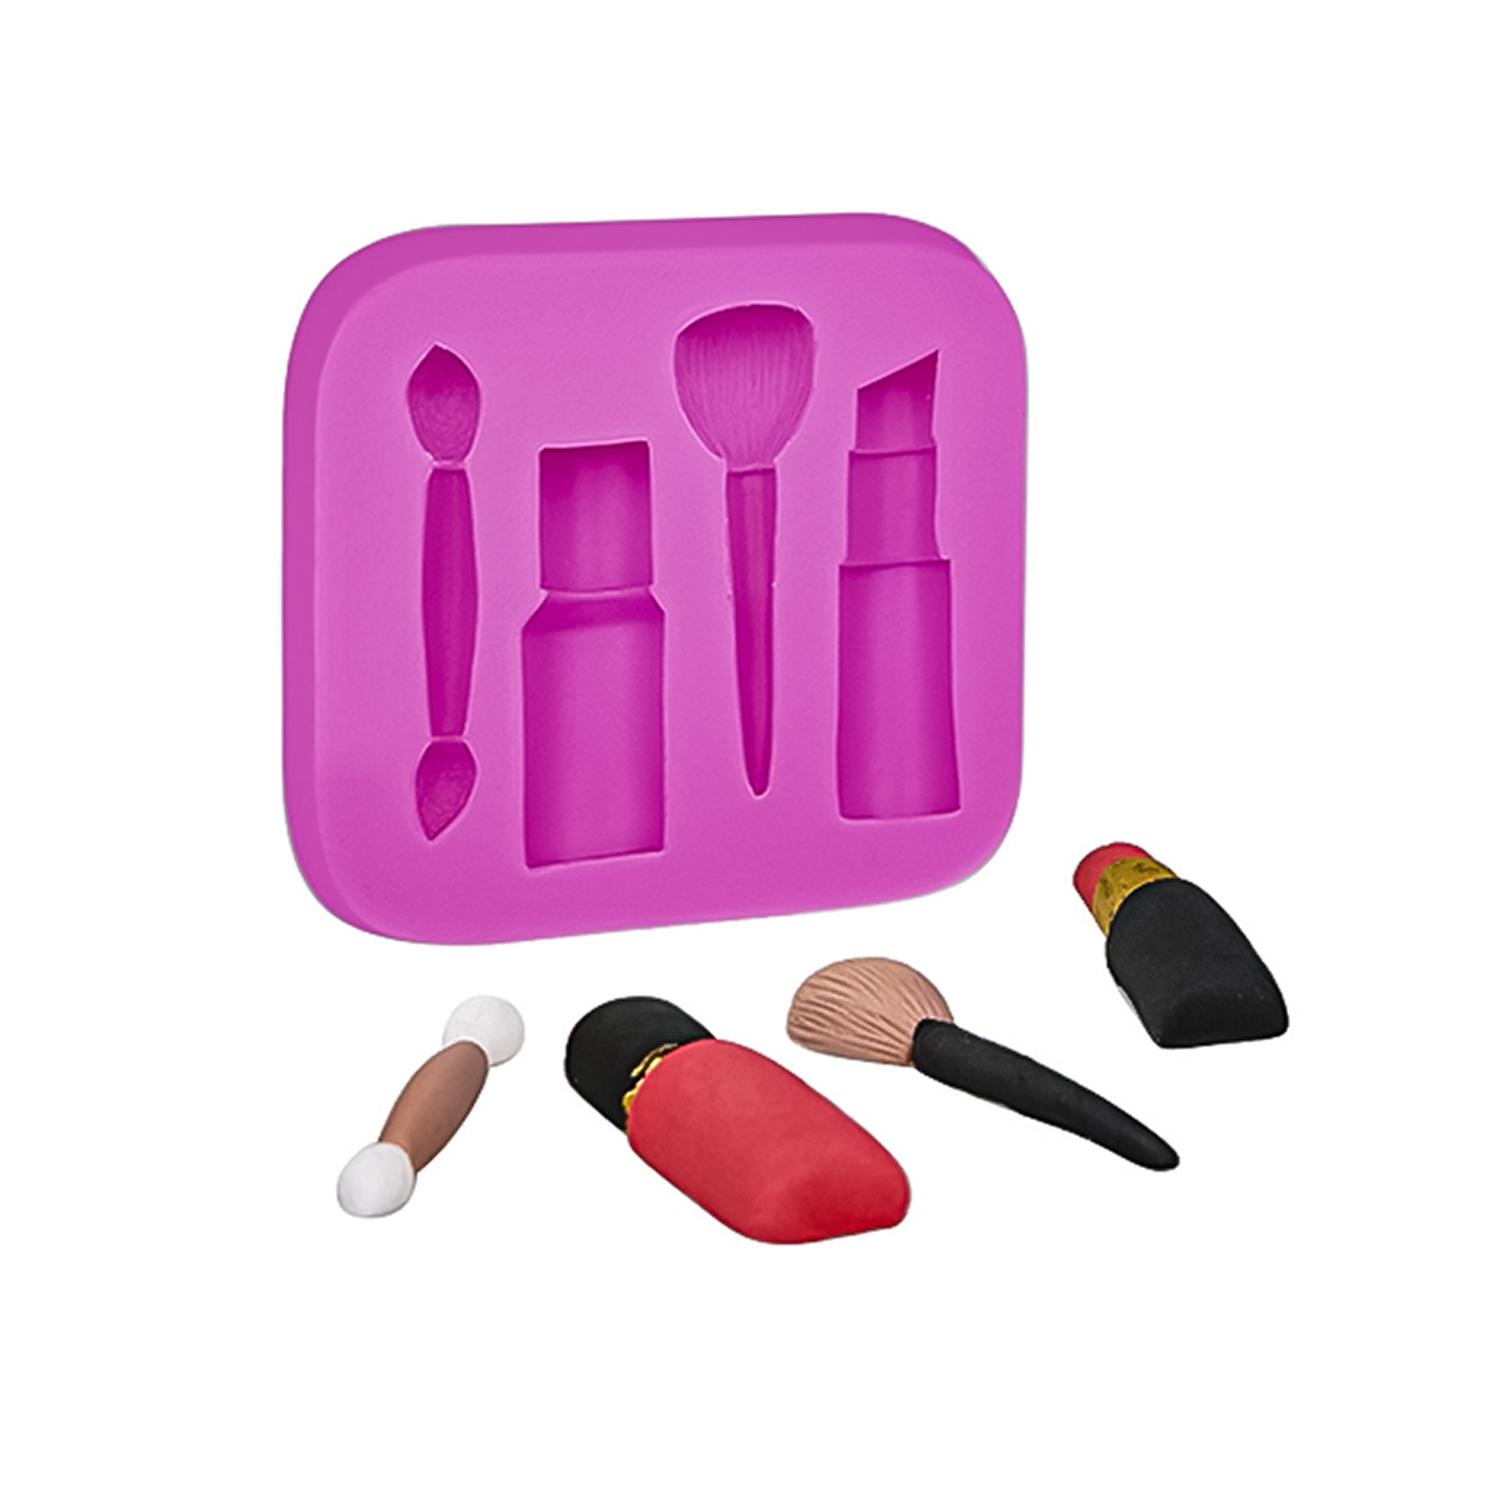 SFGM0144 MAKEUP BRUSH AND LIPSTICK SILICON MOLD